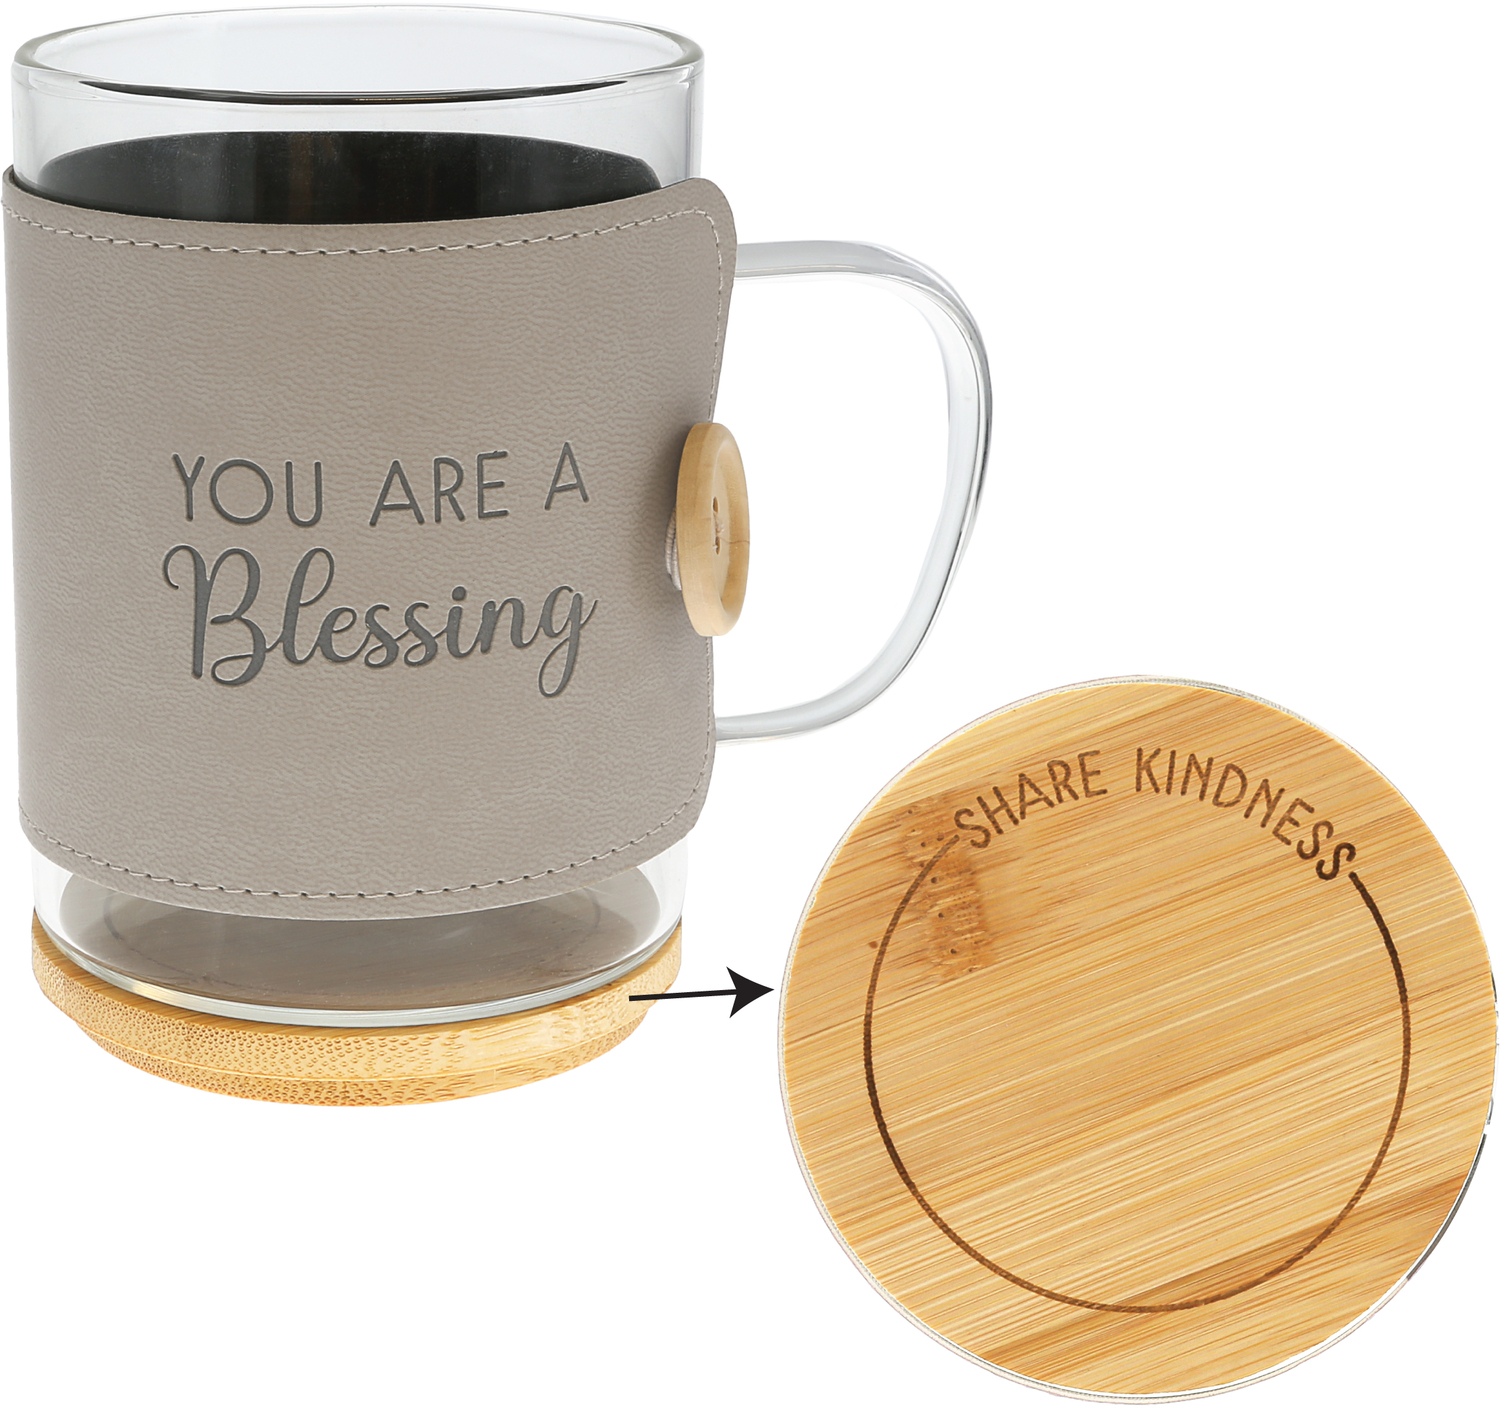 Blessing by Wrapped in Kindness - Blessing - 16 oz Wrapped Glass Mug with Coaster Lid